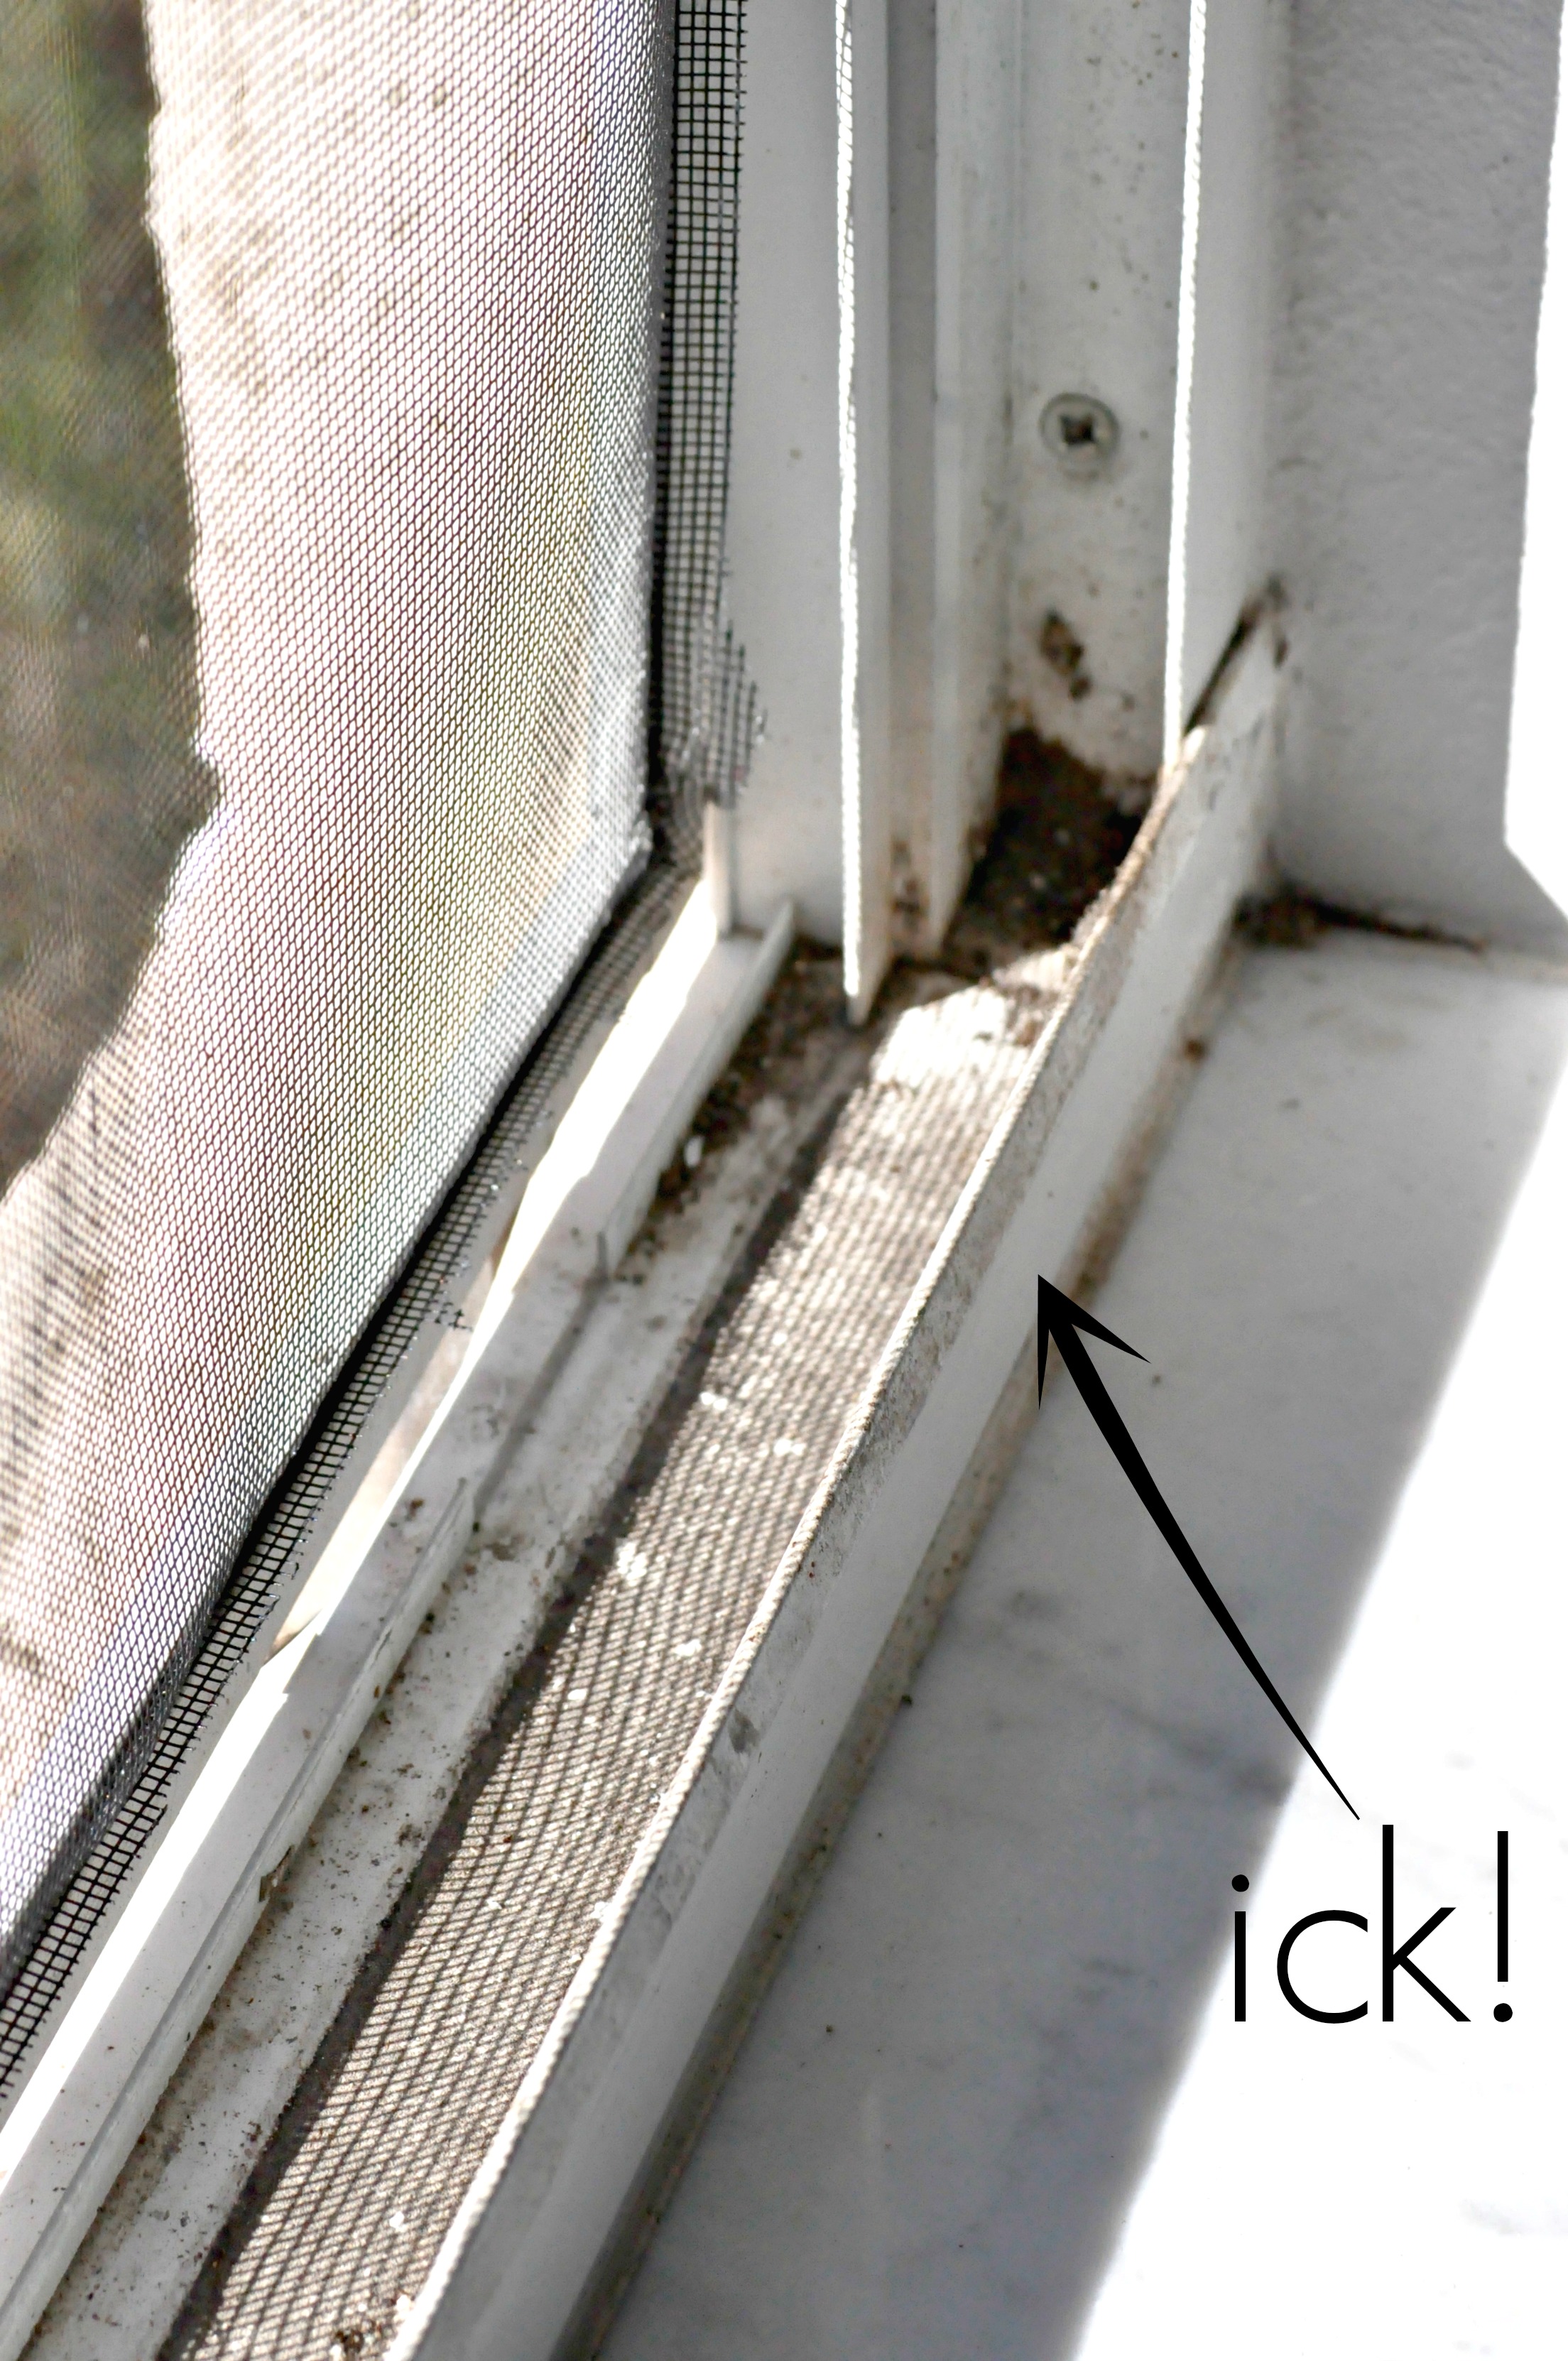 How to Clean Windows - Best Way to Clean Windows Inside and Out